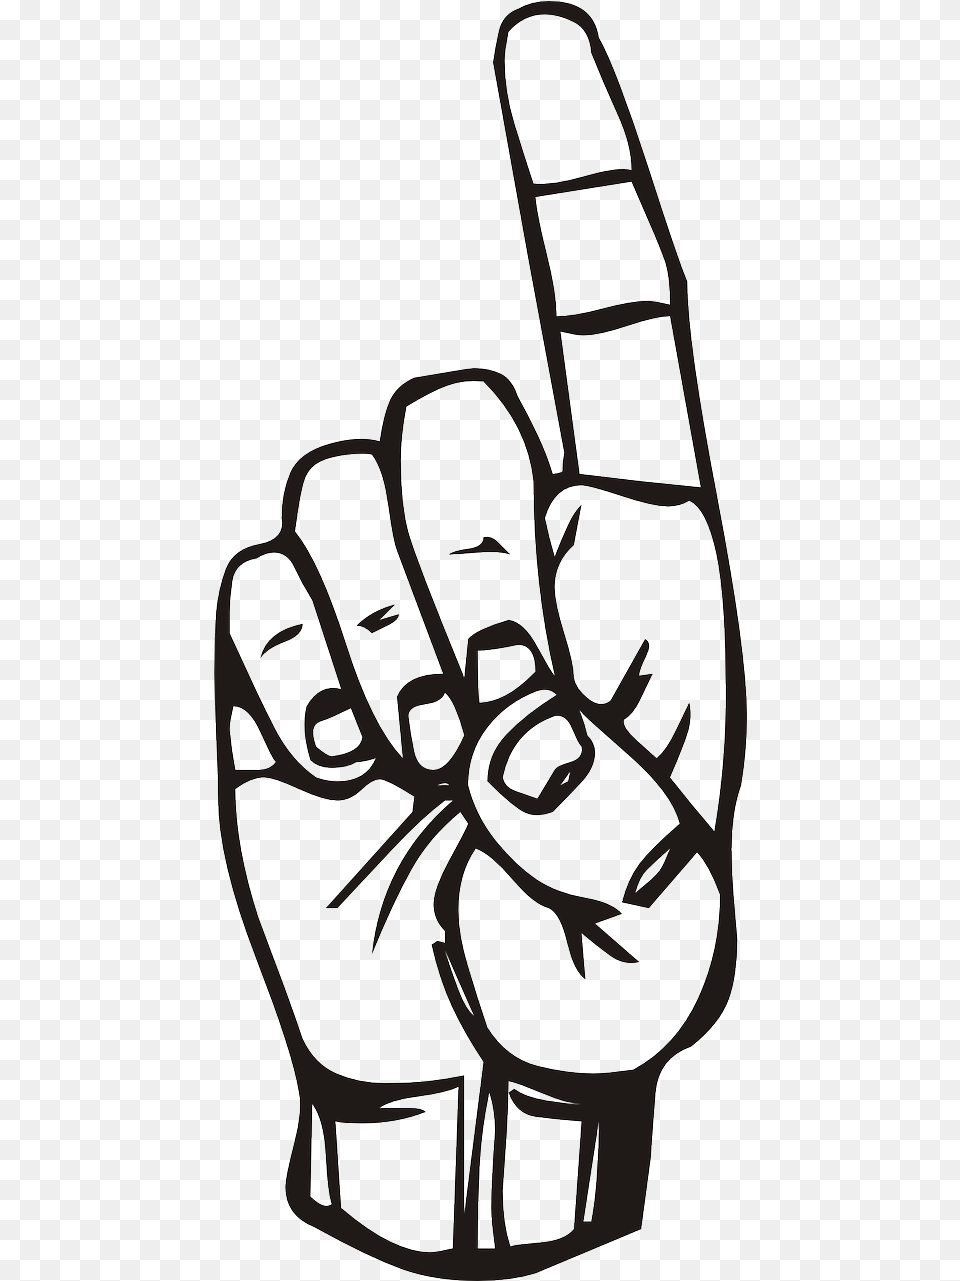 Index Finger Clipart Black And White, Clothing, Glove, Body Part, Hand Free Transparent Png